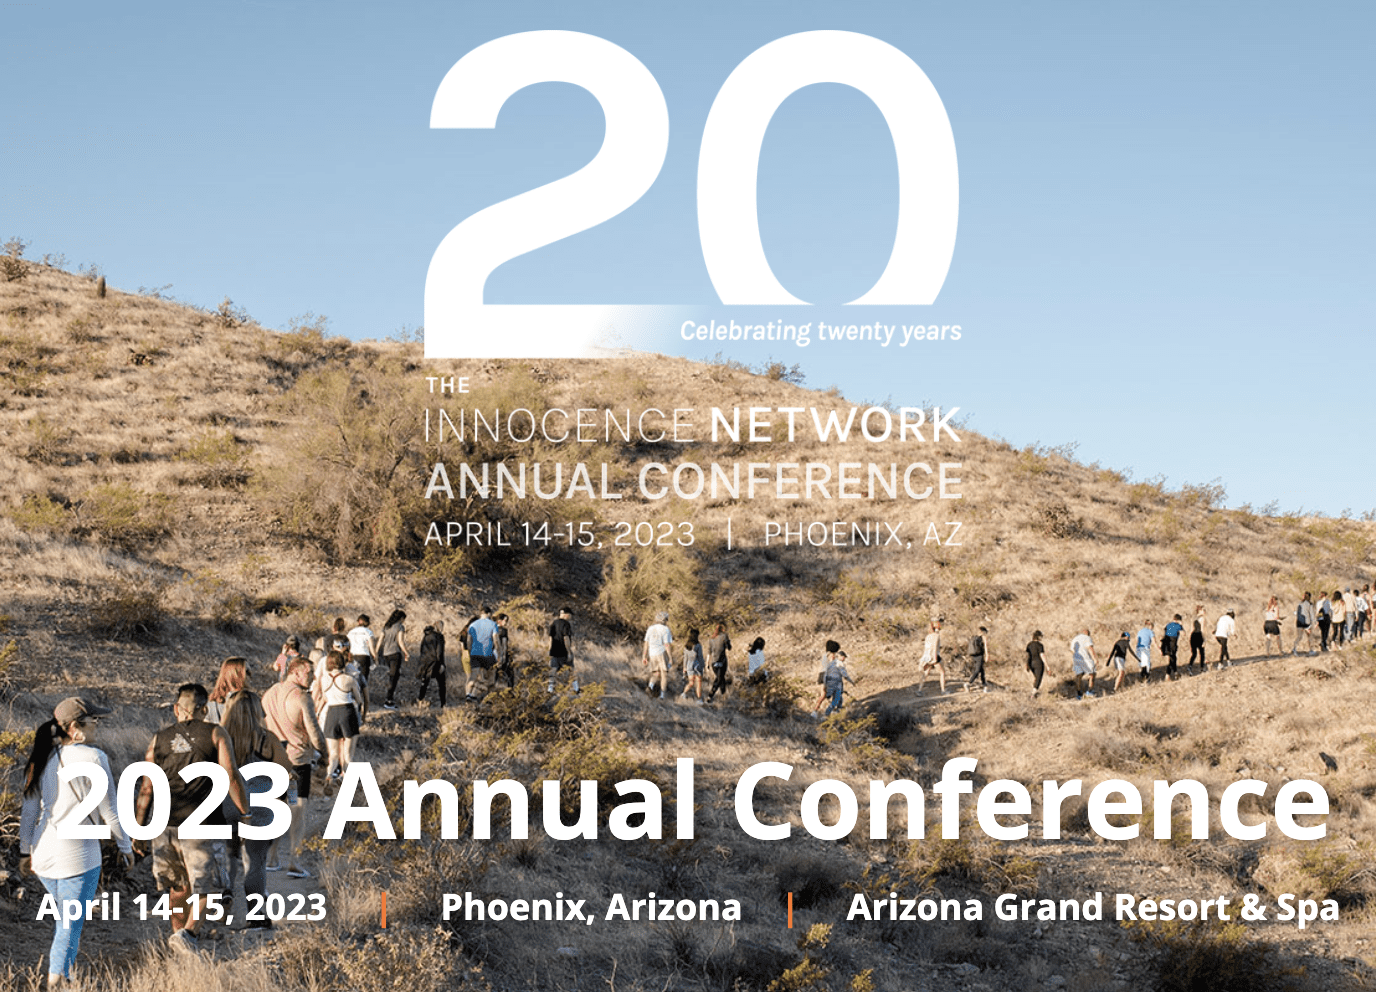 The 2023 Innocence Network Annual Conference, April 14-15 in Phoenix, AZ at the Arizona Grand Resort & Spa